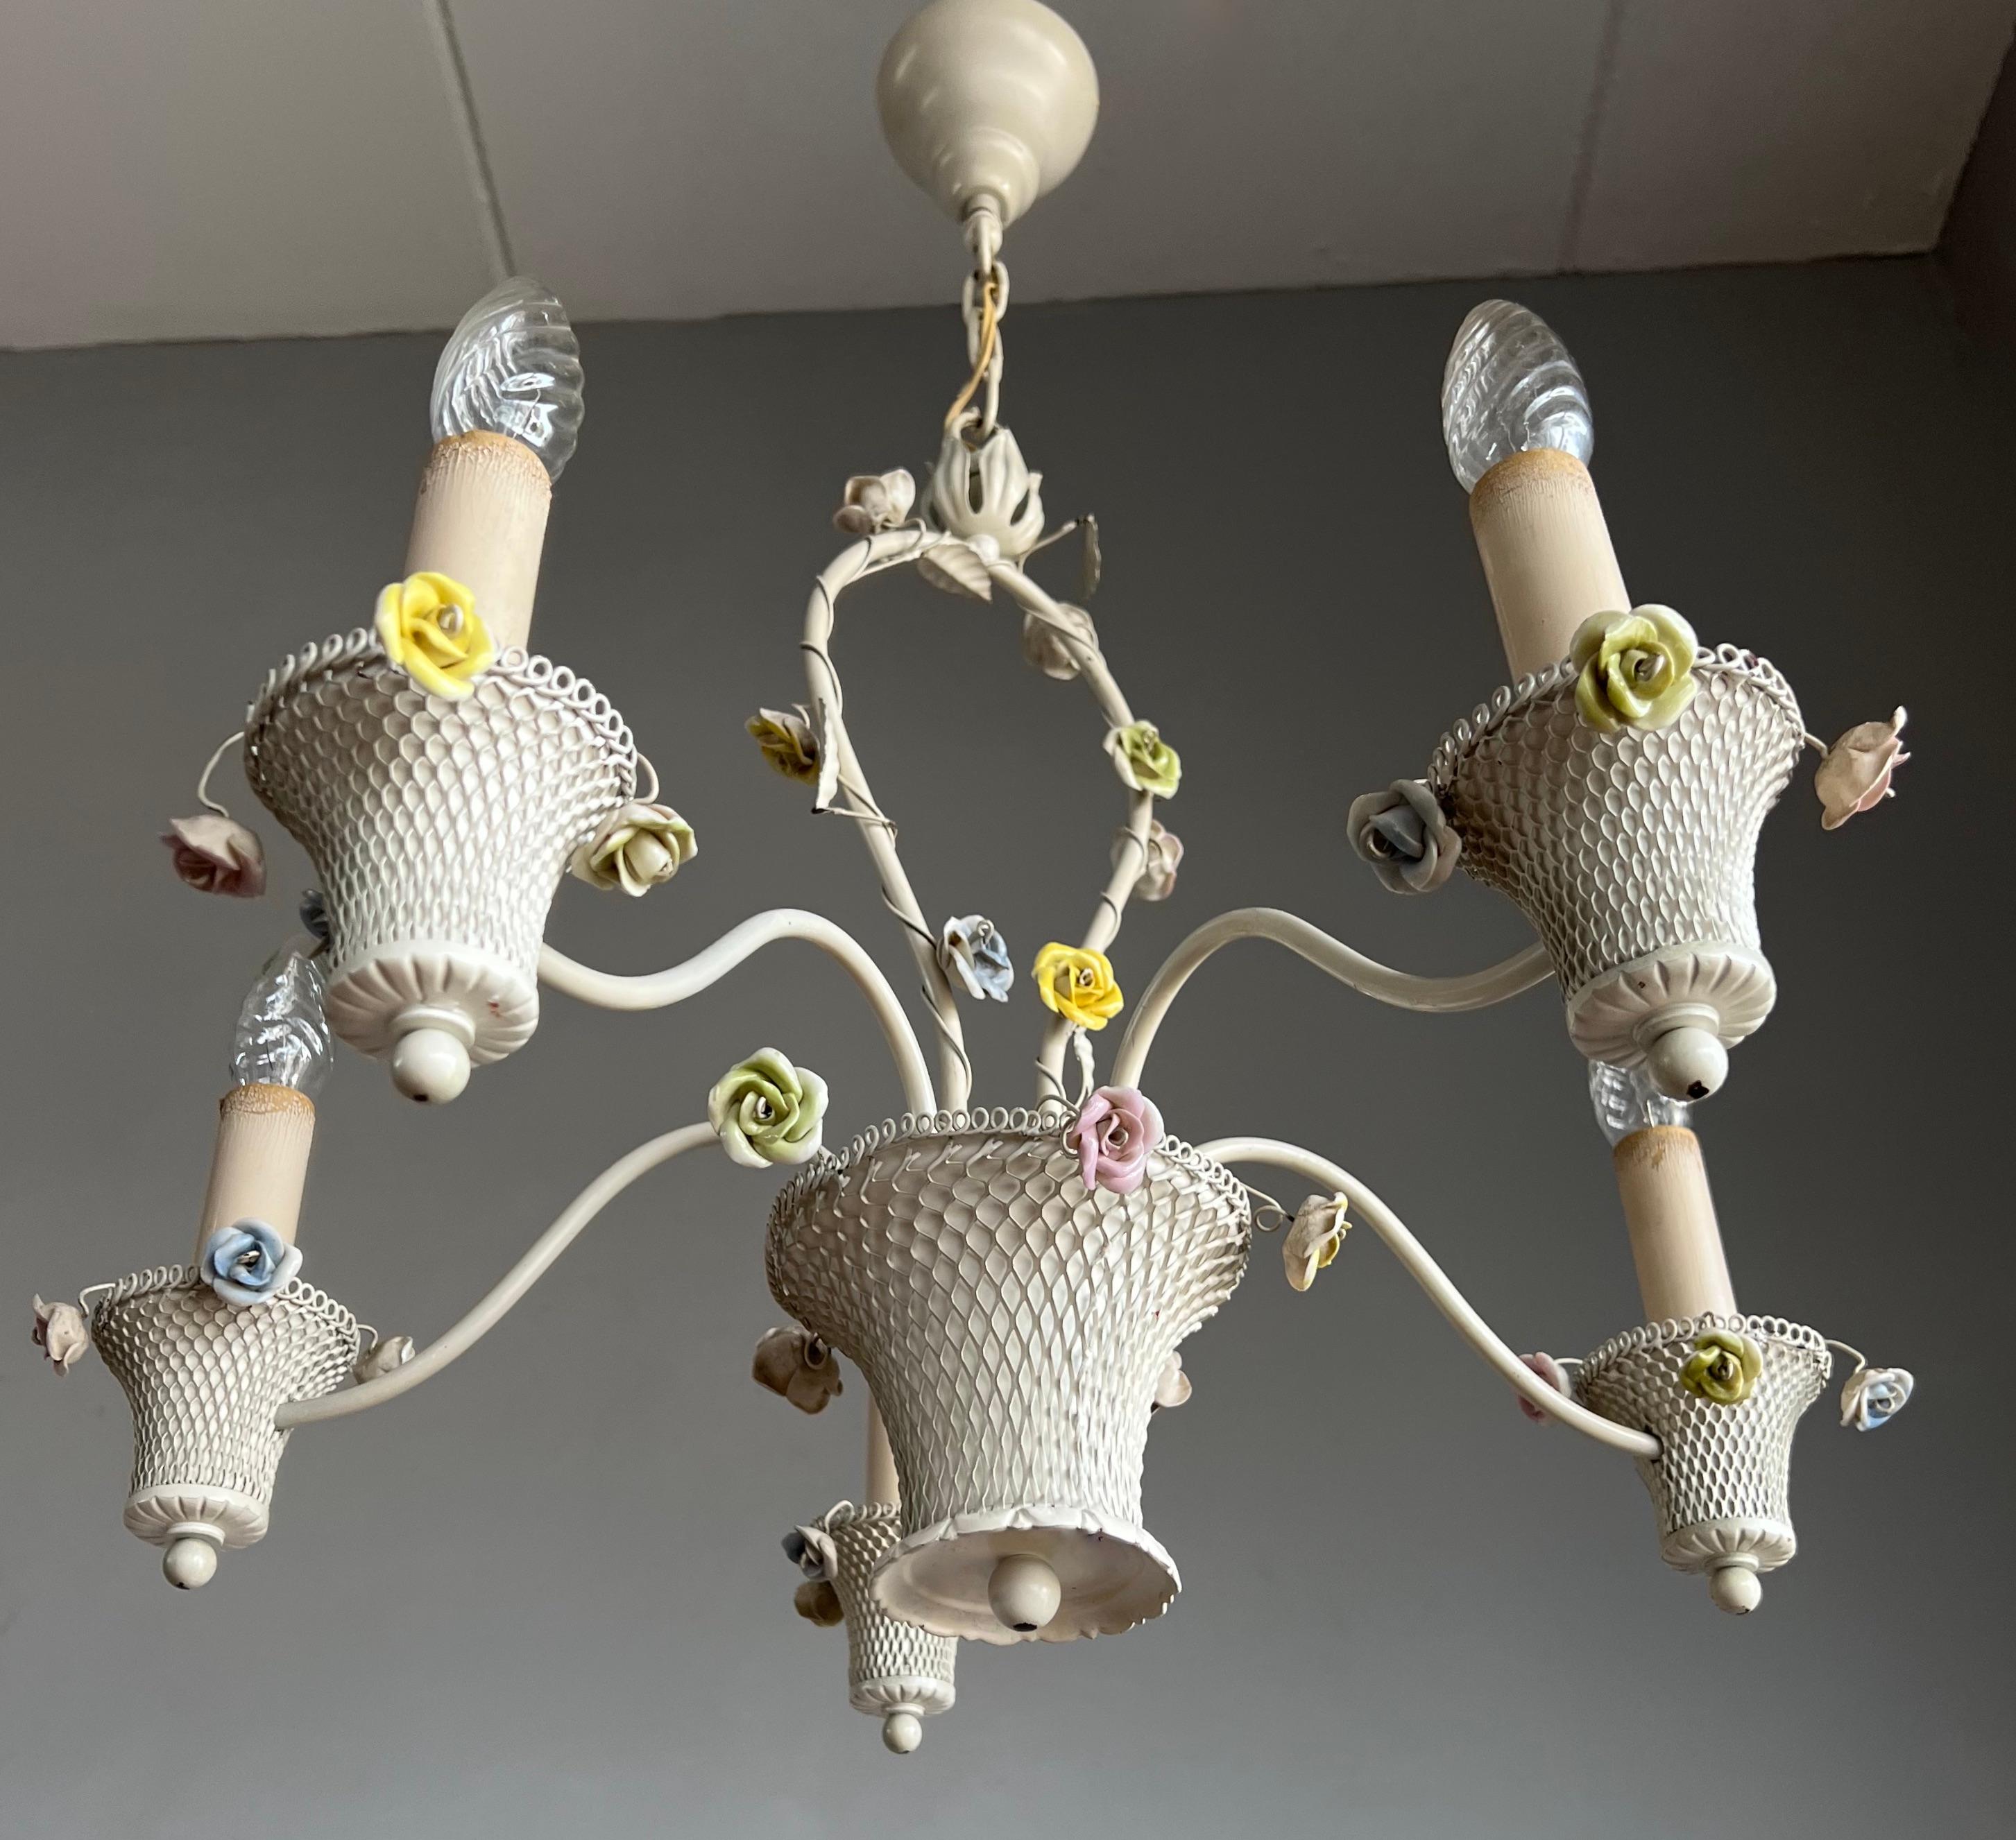 Original design, all hand-crafted in Italy, pendant light with white metal baskets and porcelain flowers.

This well designed and beautifully executed chandelier is a joy to look at, also, because it is in mint condition. If you like having flowers